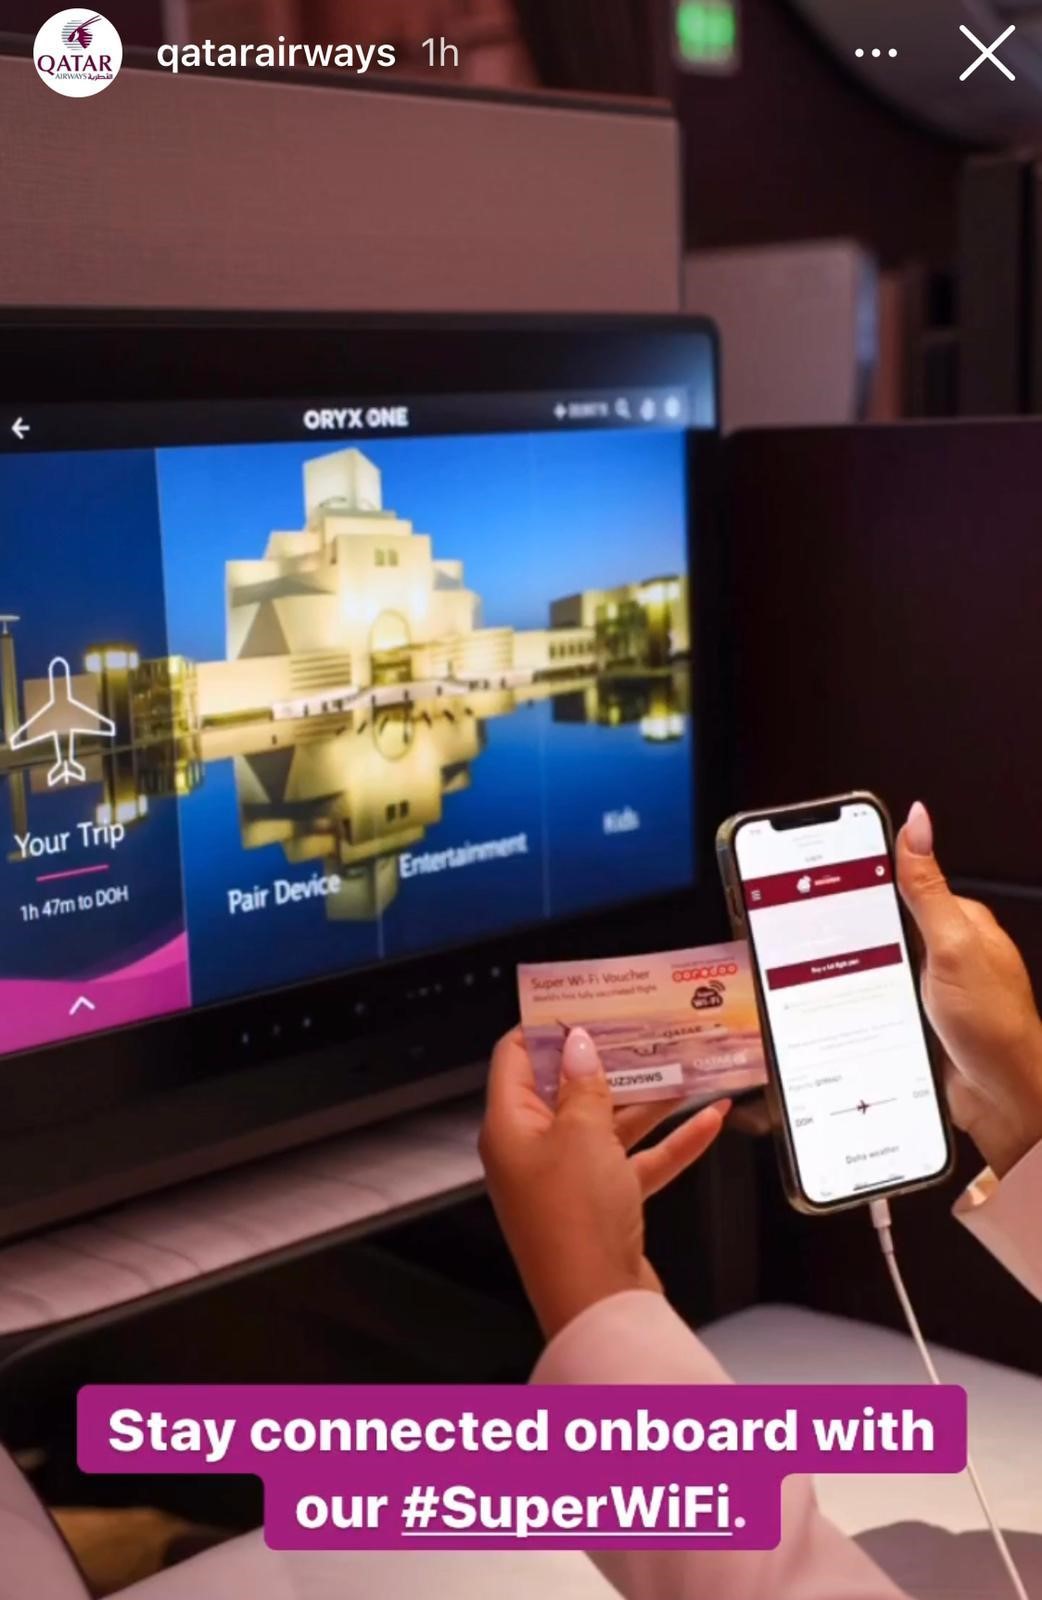 A mobile phone and desktop being used onboard the Qatar Airways flight